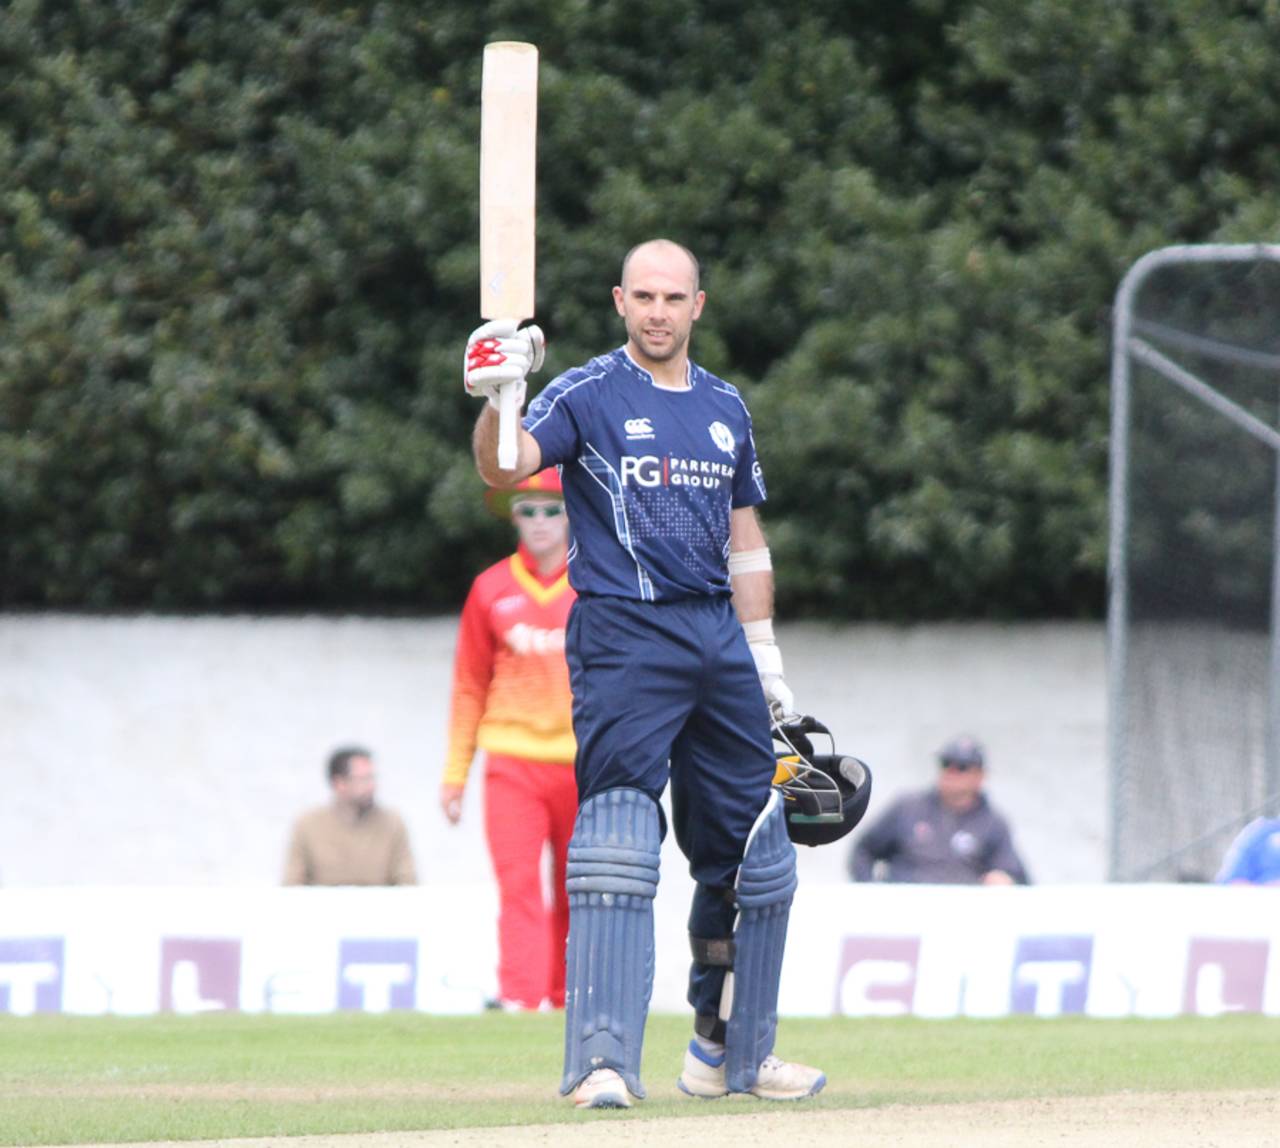 Kyle Coetzer played a big part in Scotland picking up their first ODI win over a Full Member by cracking his fourth ODI century&nbsp;&nbsp;&bull;&nbsp;&nbsp;Peter Della Penna